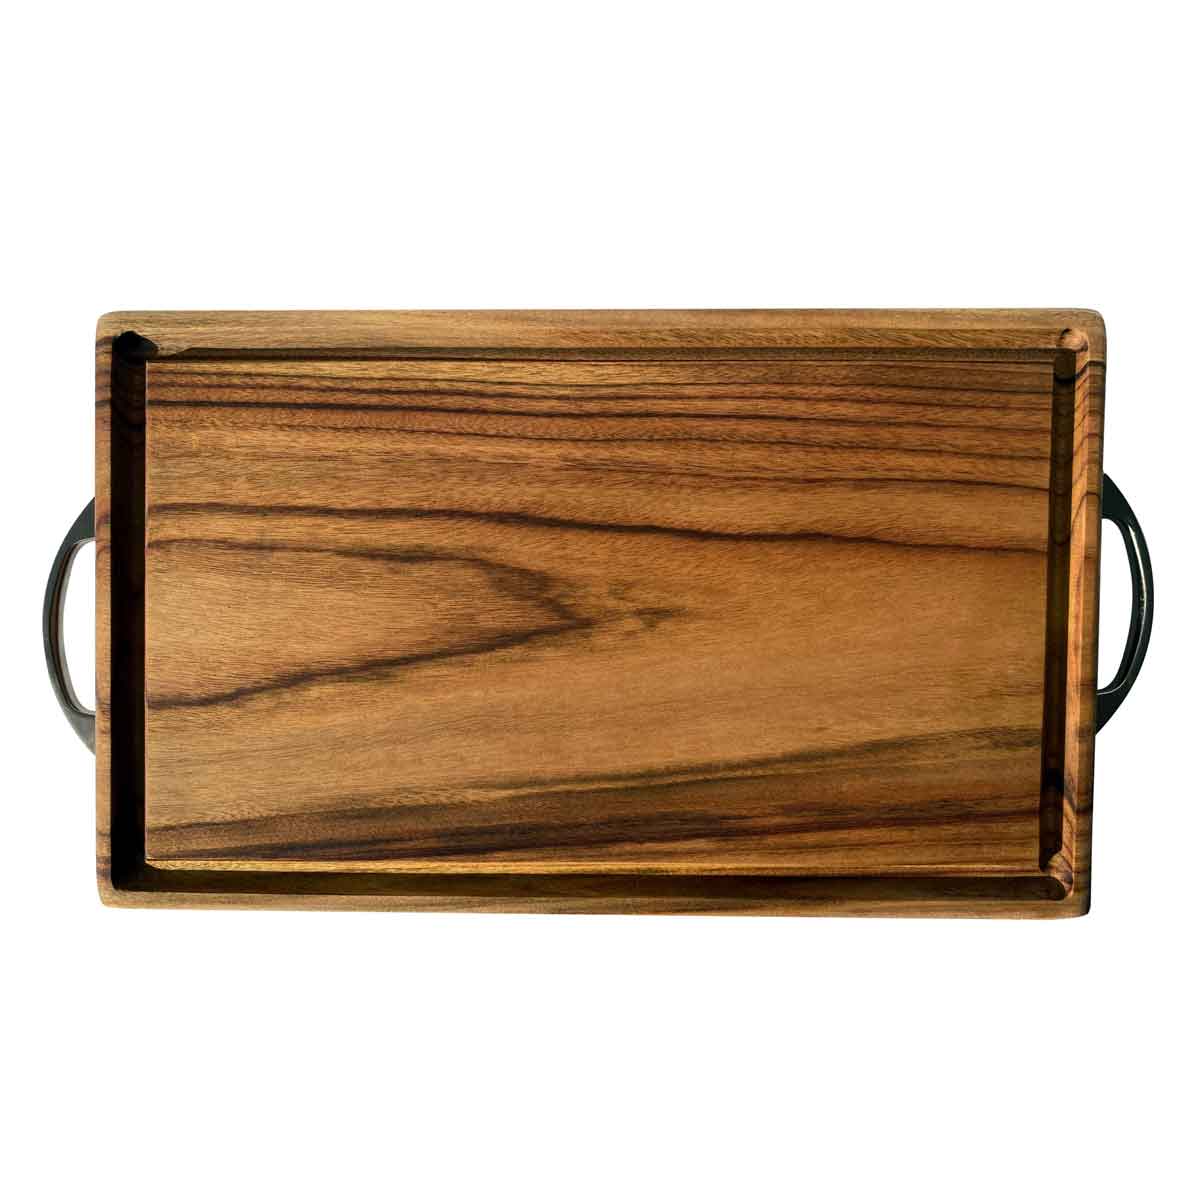 Extra large rectangular wooden carving board, with a deep juice rail or groove around the edge and stainless steel handles designed by Nature's Boards with camphor laurel timber that's naturally antibacterial.